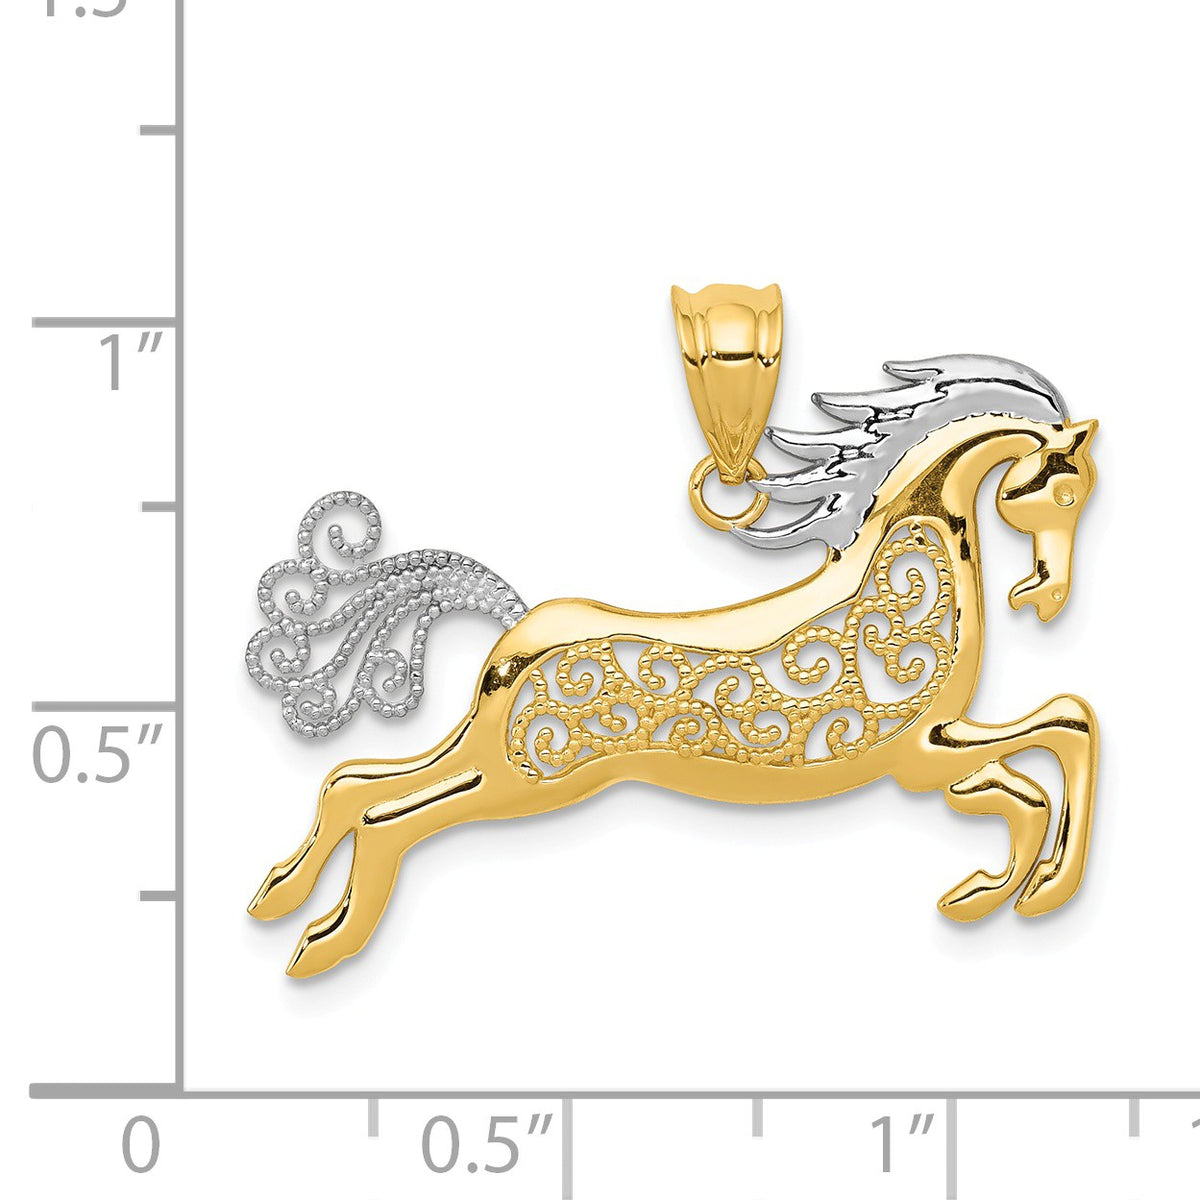 Alternate view of the 14k Yellow Gold and White Rhodium Two Tone Filigree Horse Pendant by The Black Bow Jewelry Co.